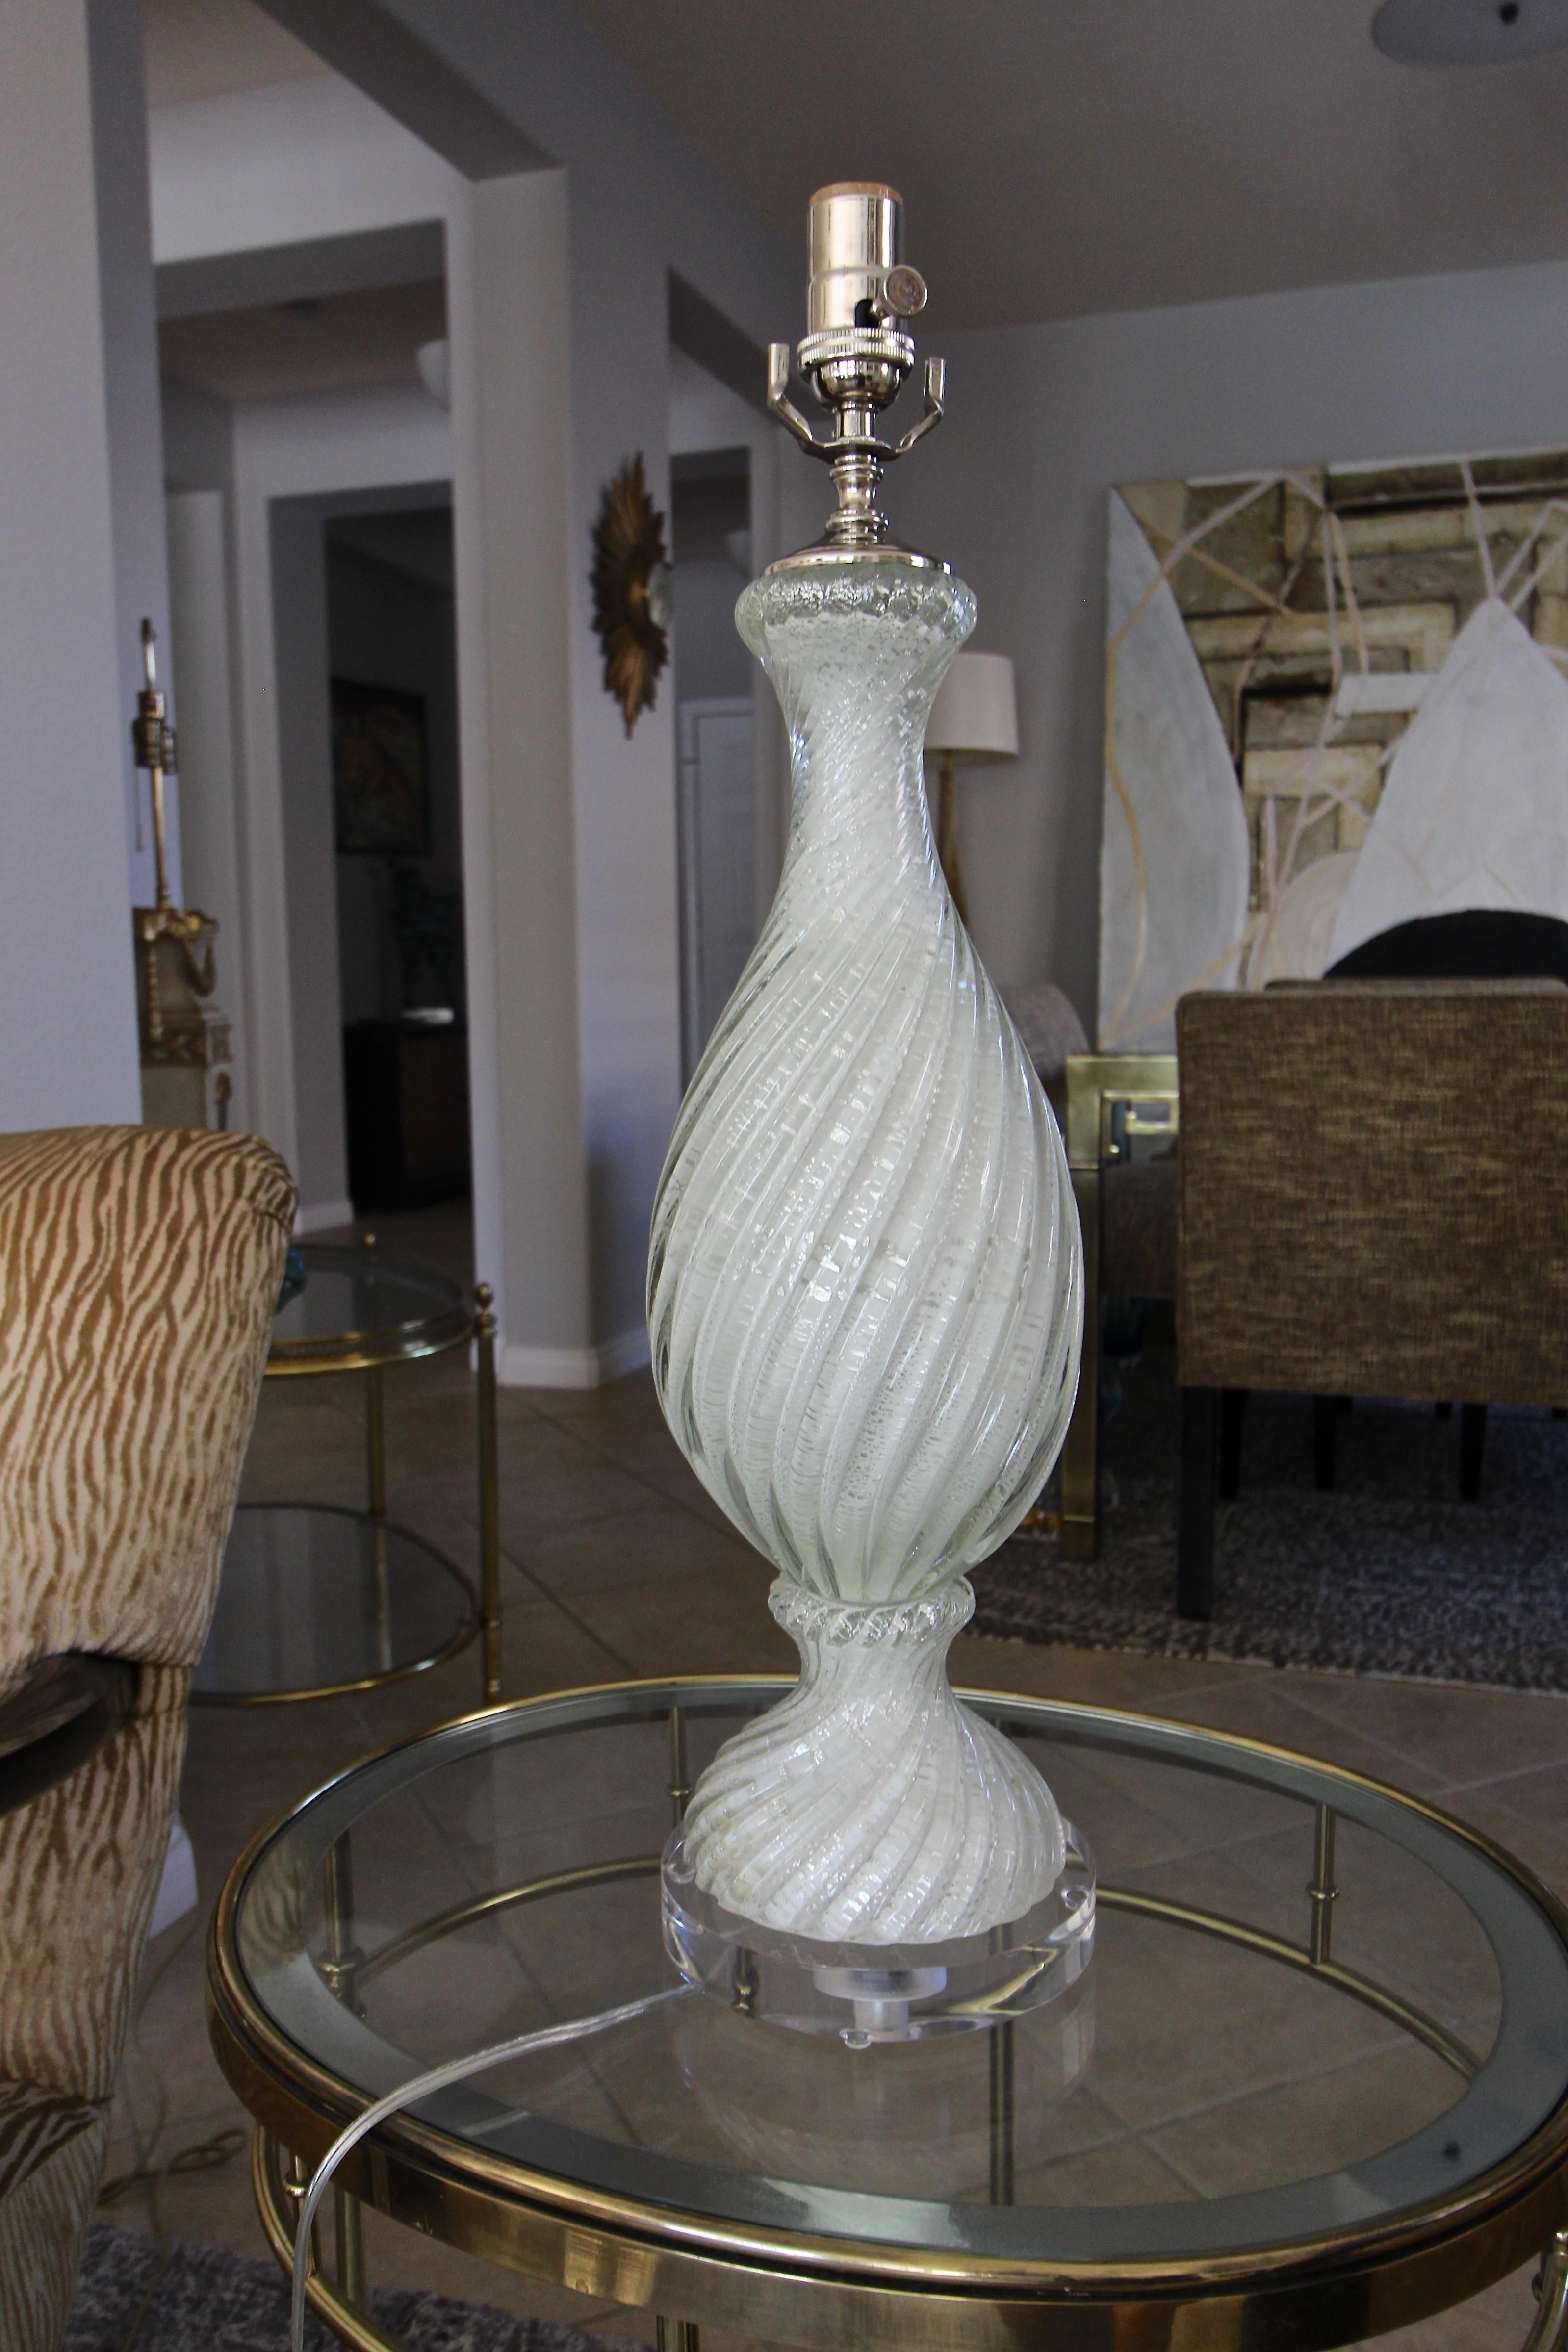 Murano Italian hand blown white twisted glass table lamp with silver mica flecks throughout on custom acrylic base. The white glass has very faint greenish tint. Rewired with all new polished nickel fittings including new three way socket and cord.